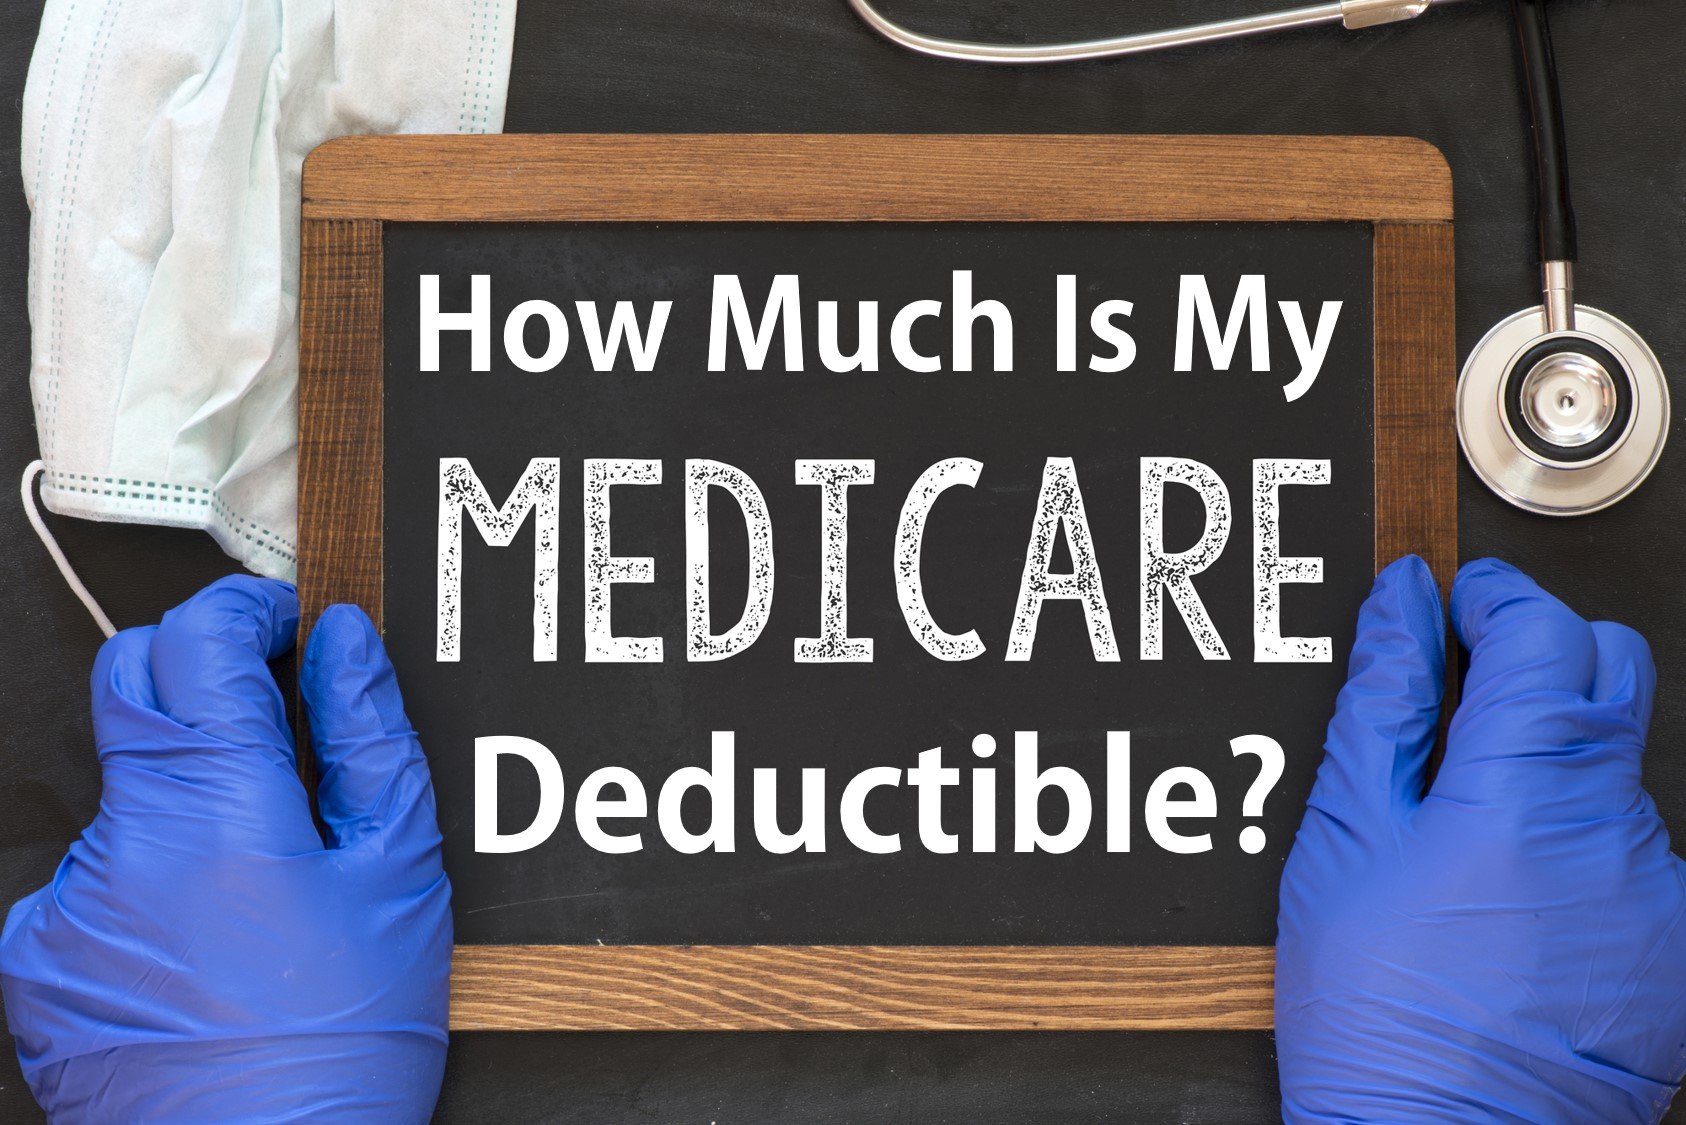 Medicare Deductible Explained: What Does Medicare Cost?